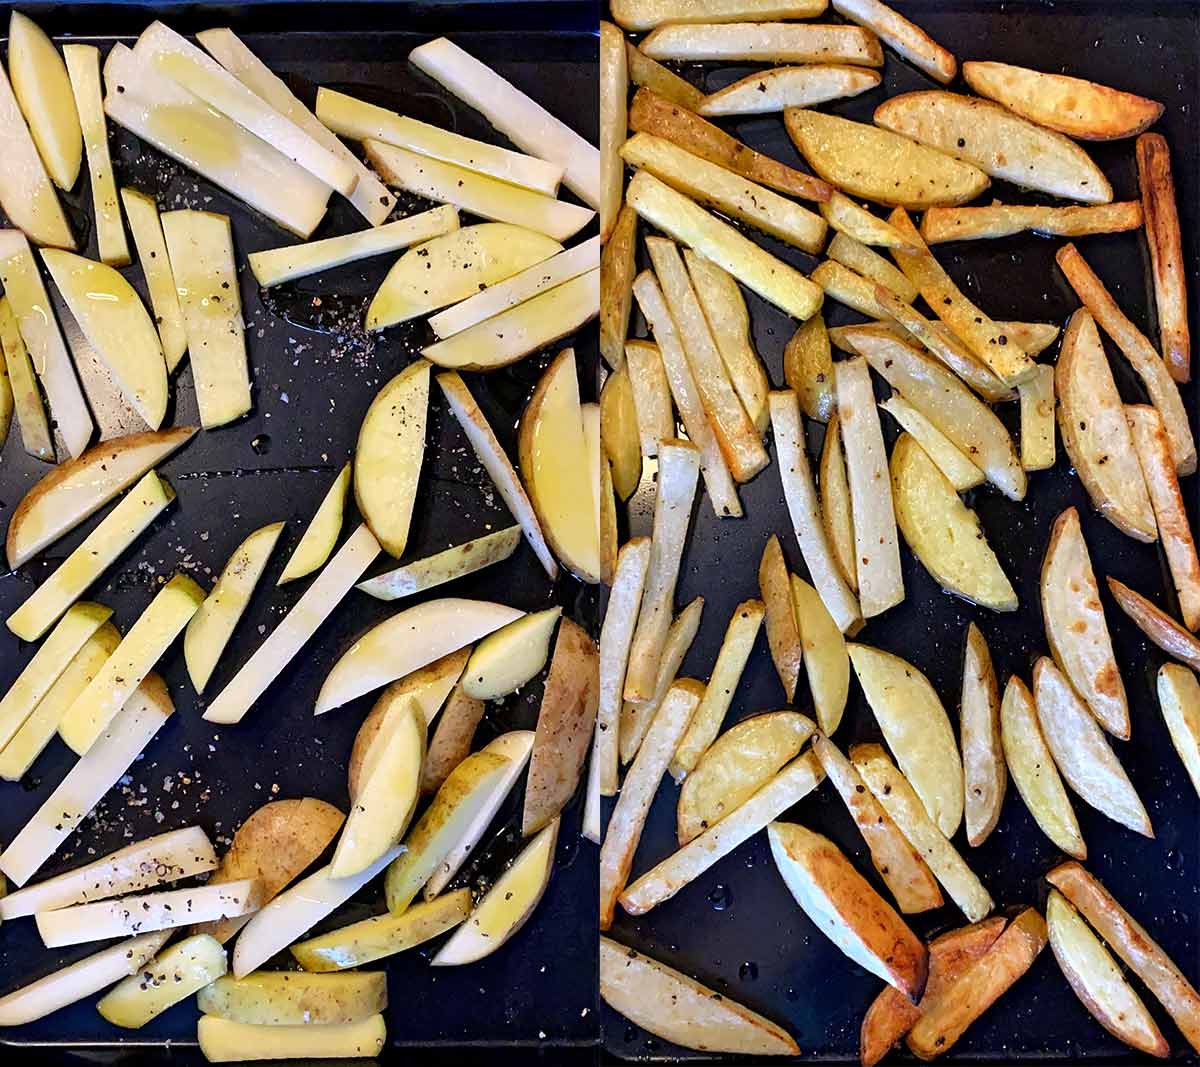 Two shot collage of potato chips on a baking tray, before and after cooking.